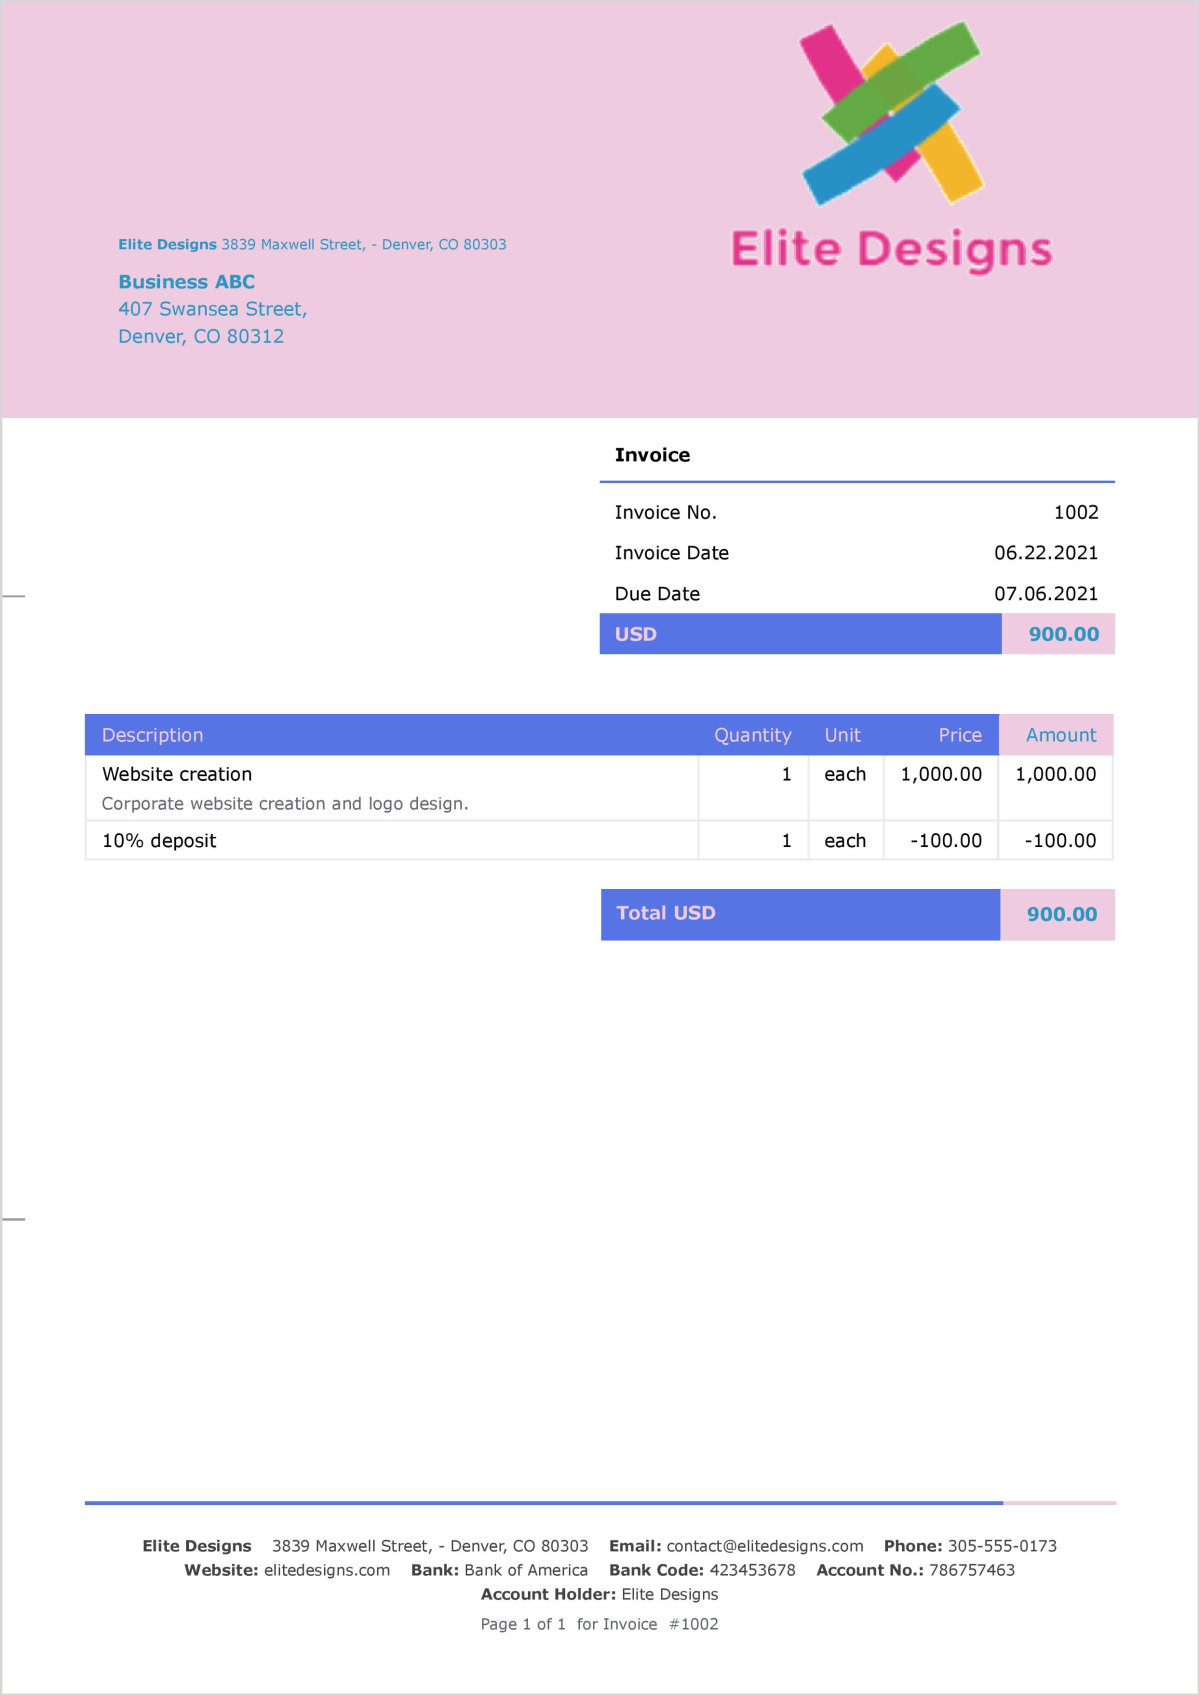 Example of a final invoice including a deposit.